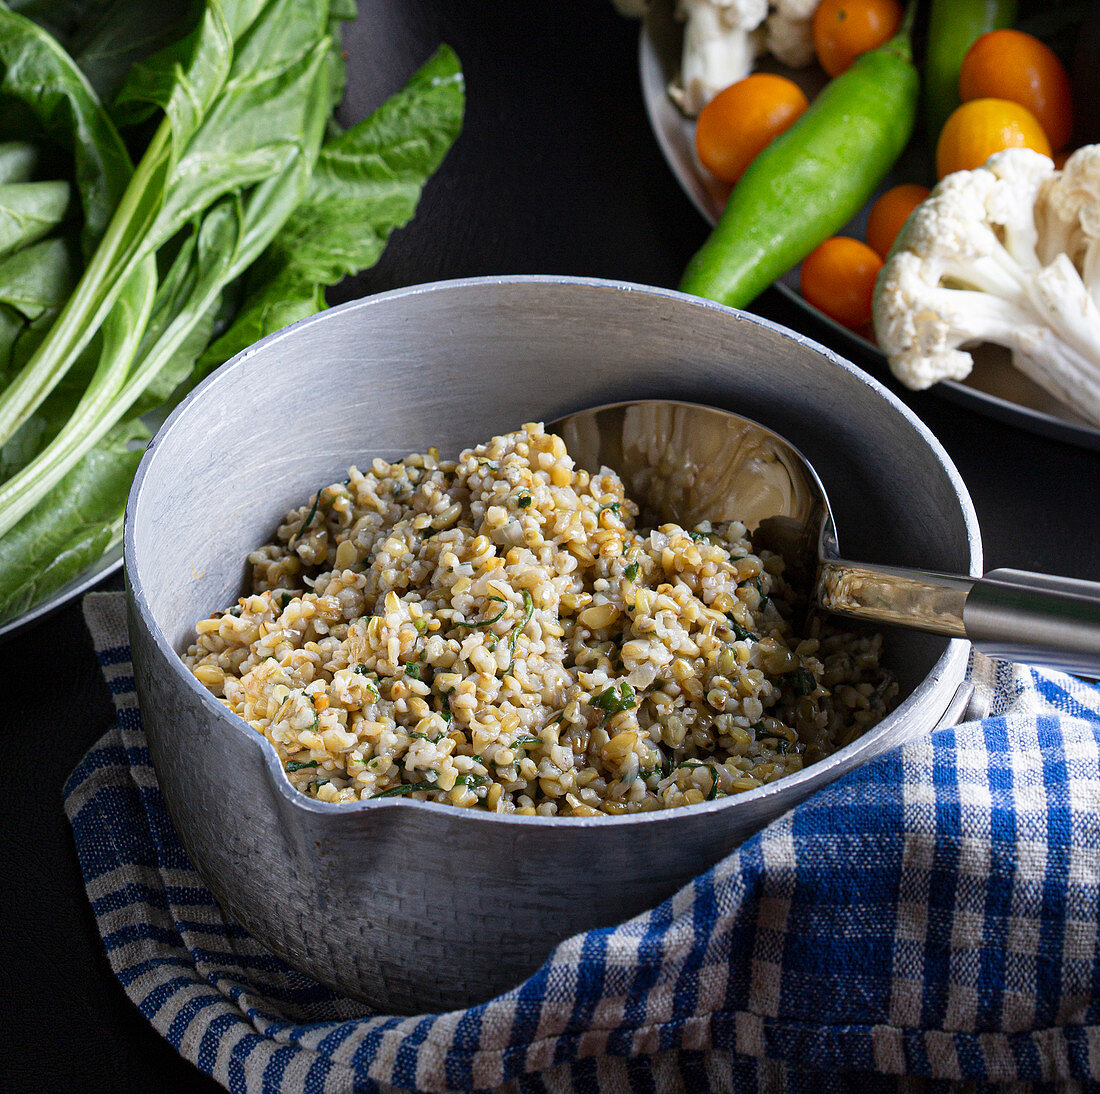 Levantine cuisine: Freekeh (cooked green young wheat) with spinach and garlic